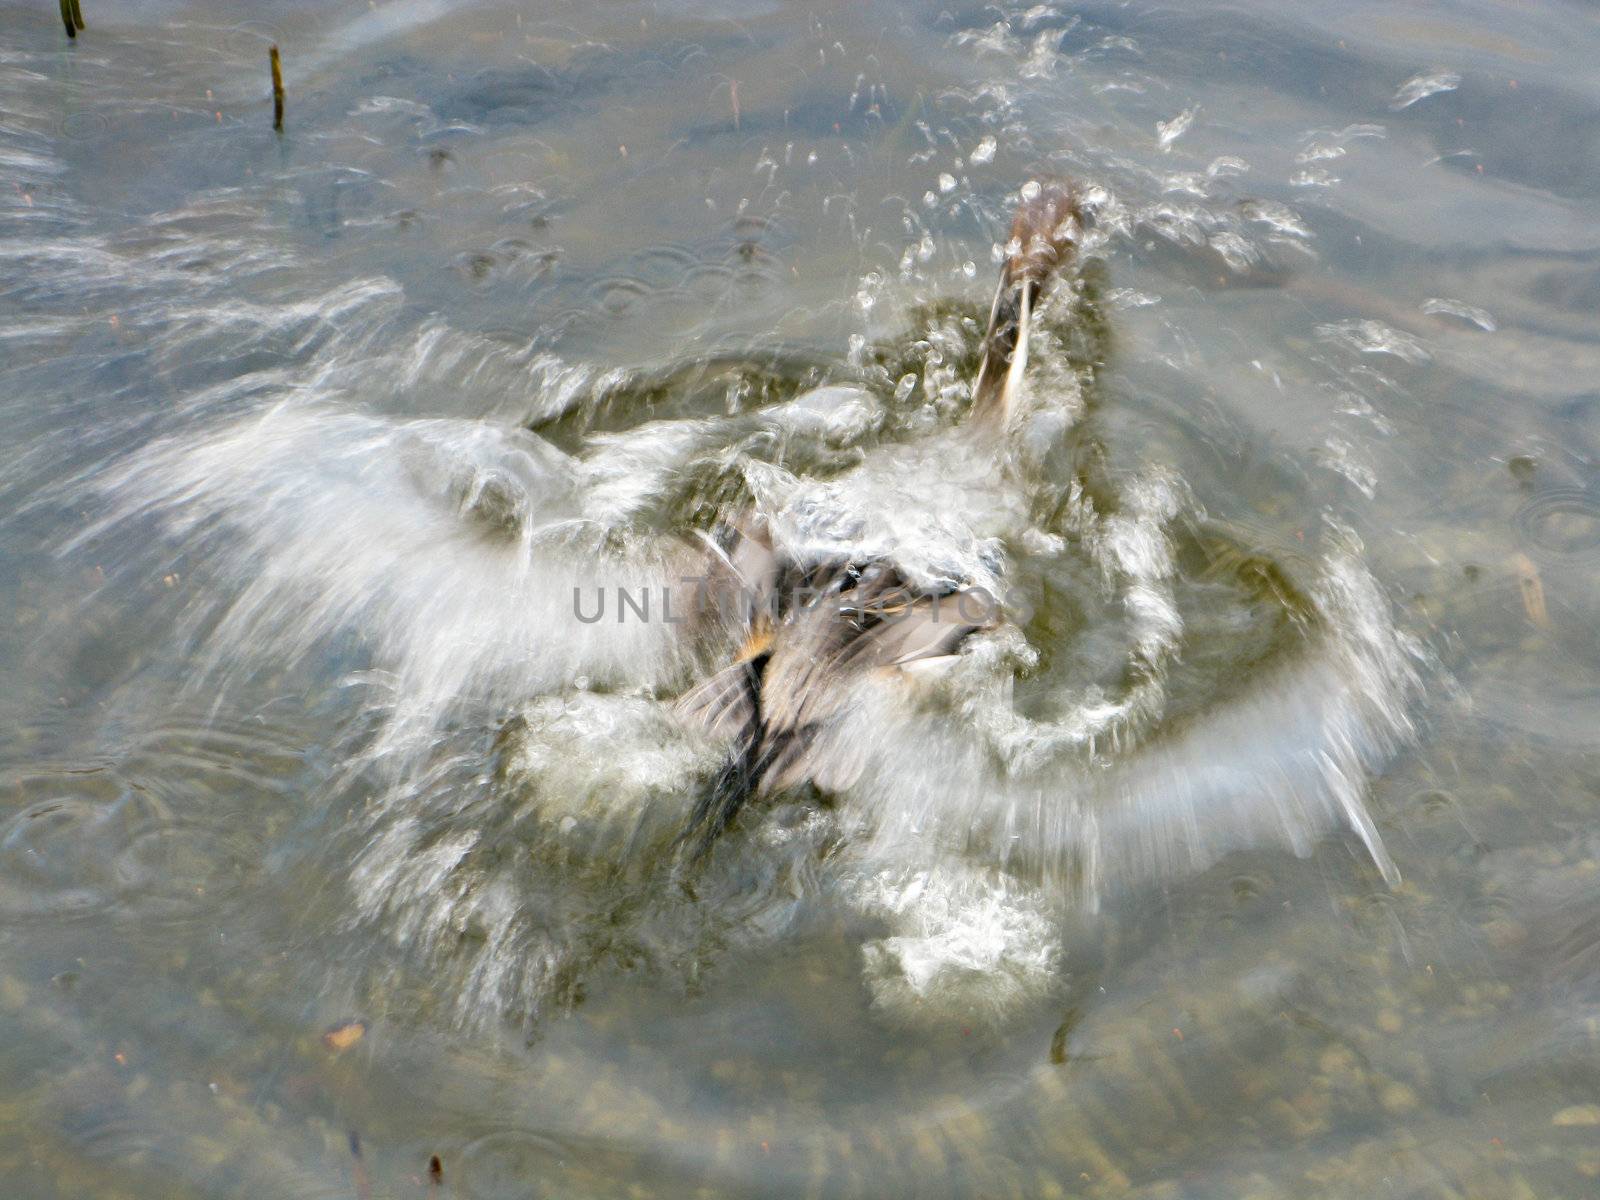 Northern pintail, anas acuta, fleeing in the water, motion blur